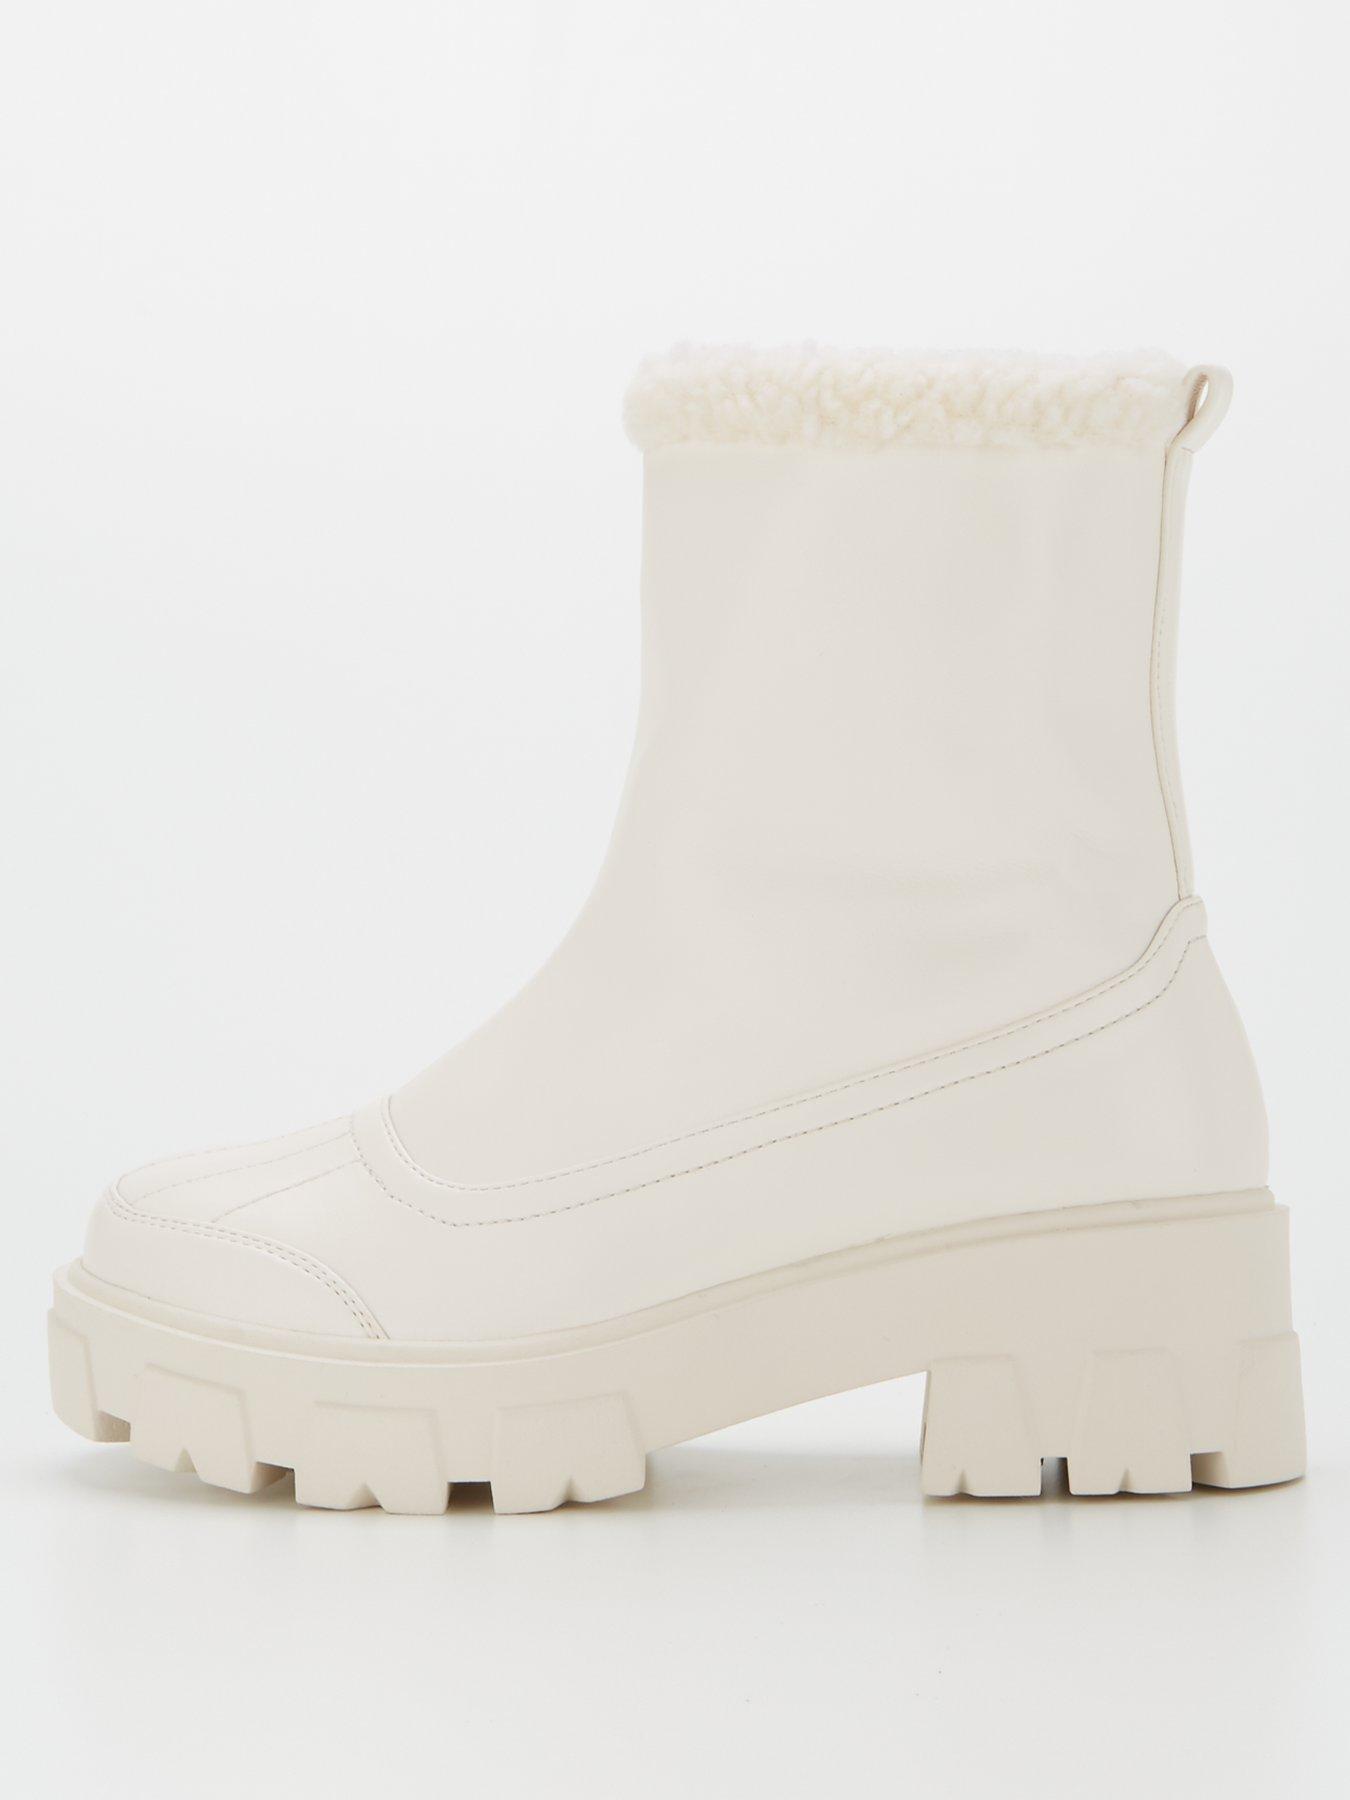 Shoes & boots Wide Fit Comfort Ankle Boots - White